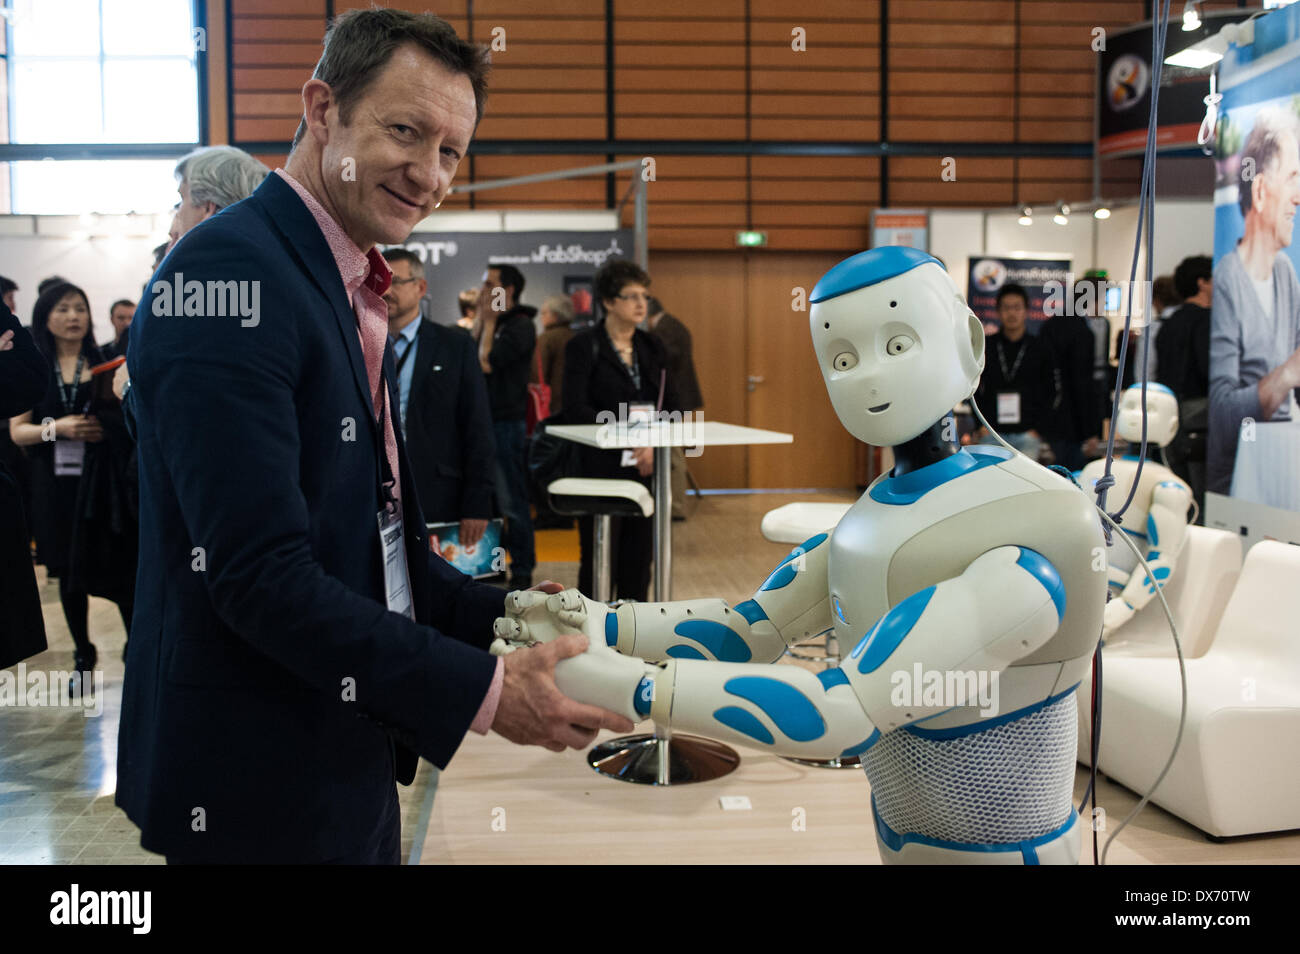 Lyon, France - 19 March 2014: An exhibitor holds the hands of NAO Robot by Aldebaran at Innorobo 2014, the biggest fair in Europe for robotics. Credit:  Piero Cruciatti/Alamy Live News Stock Photo